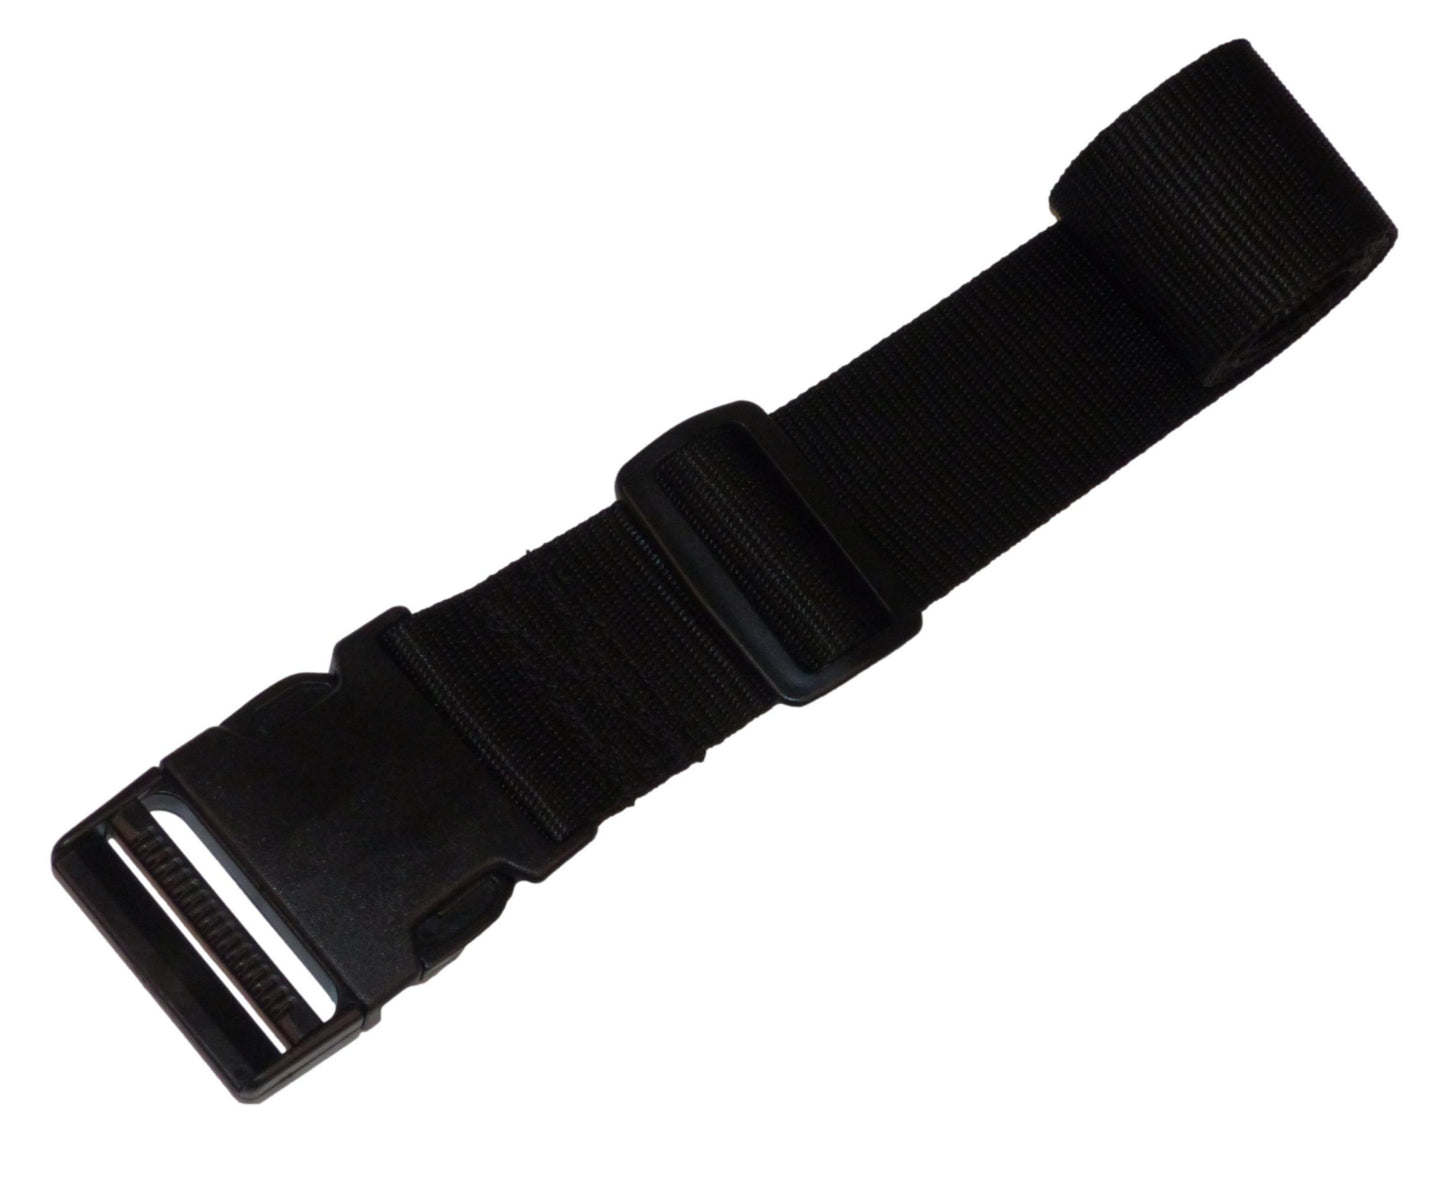 Benristraps 50mm Webbing Strap with Quick Release Buckle in black